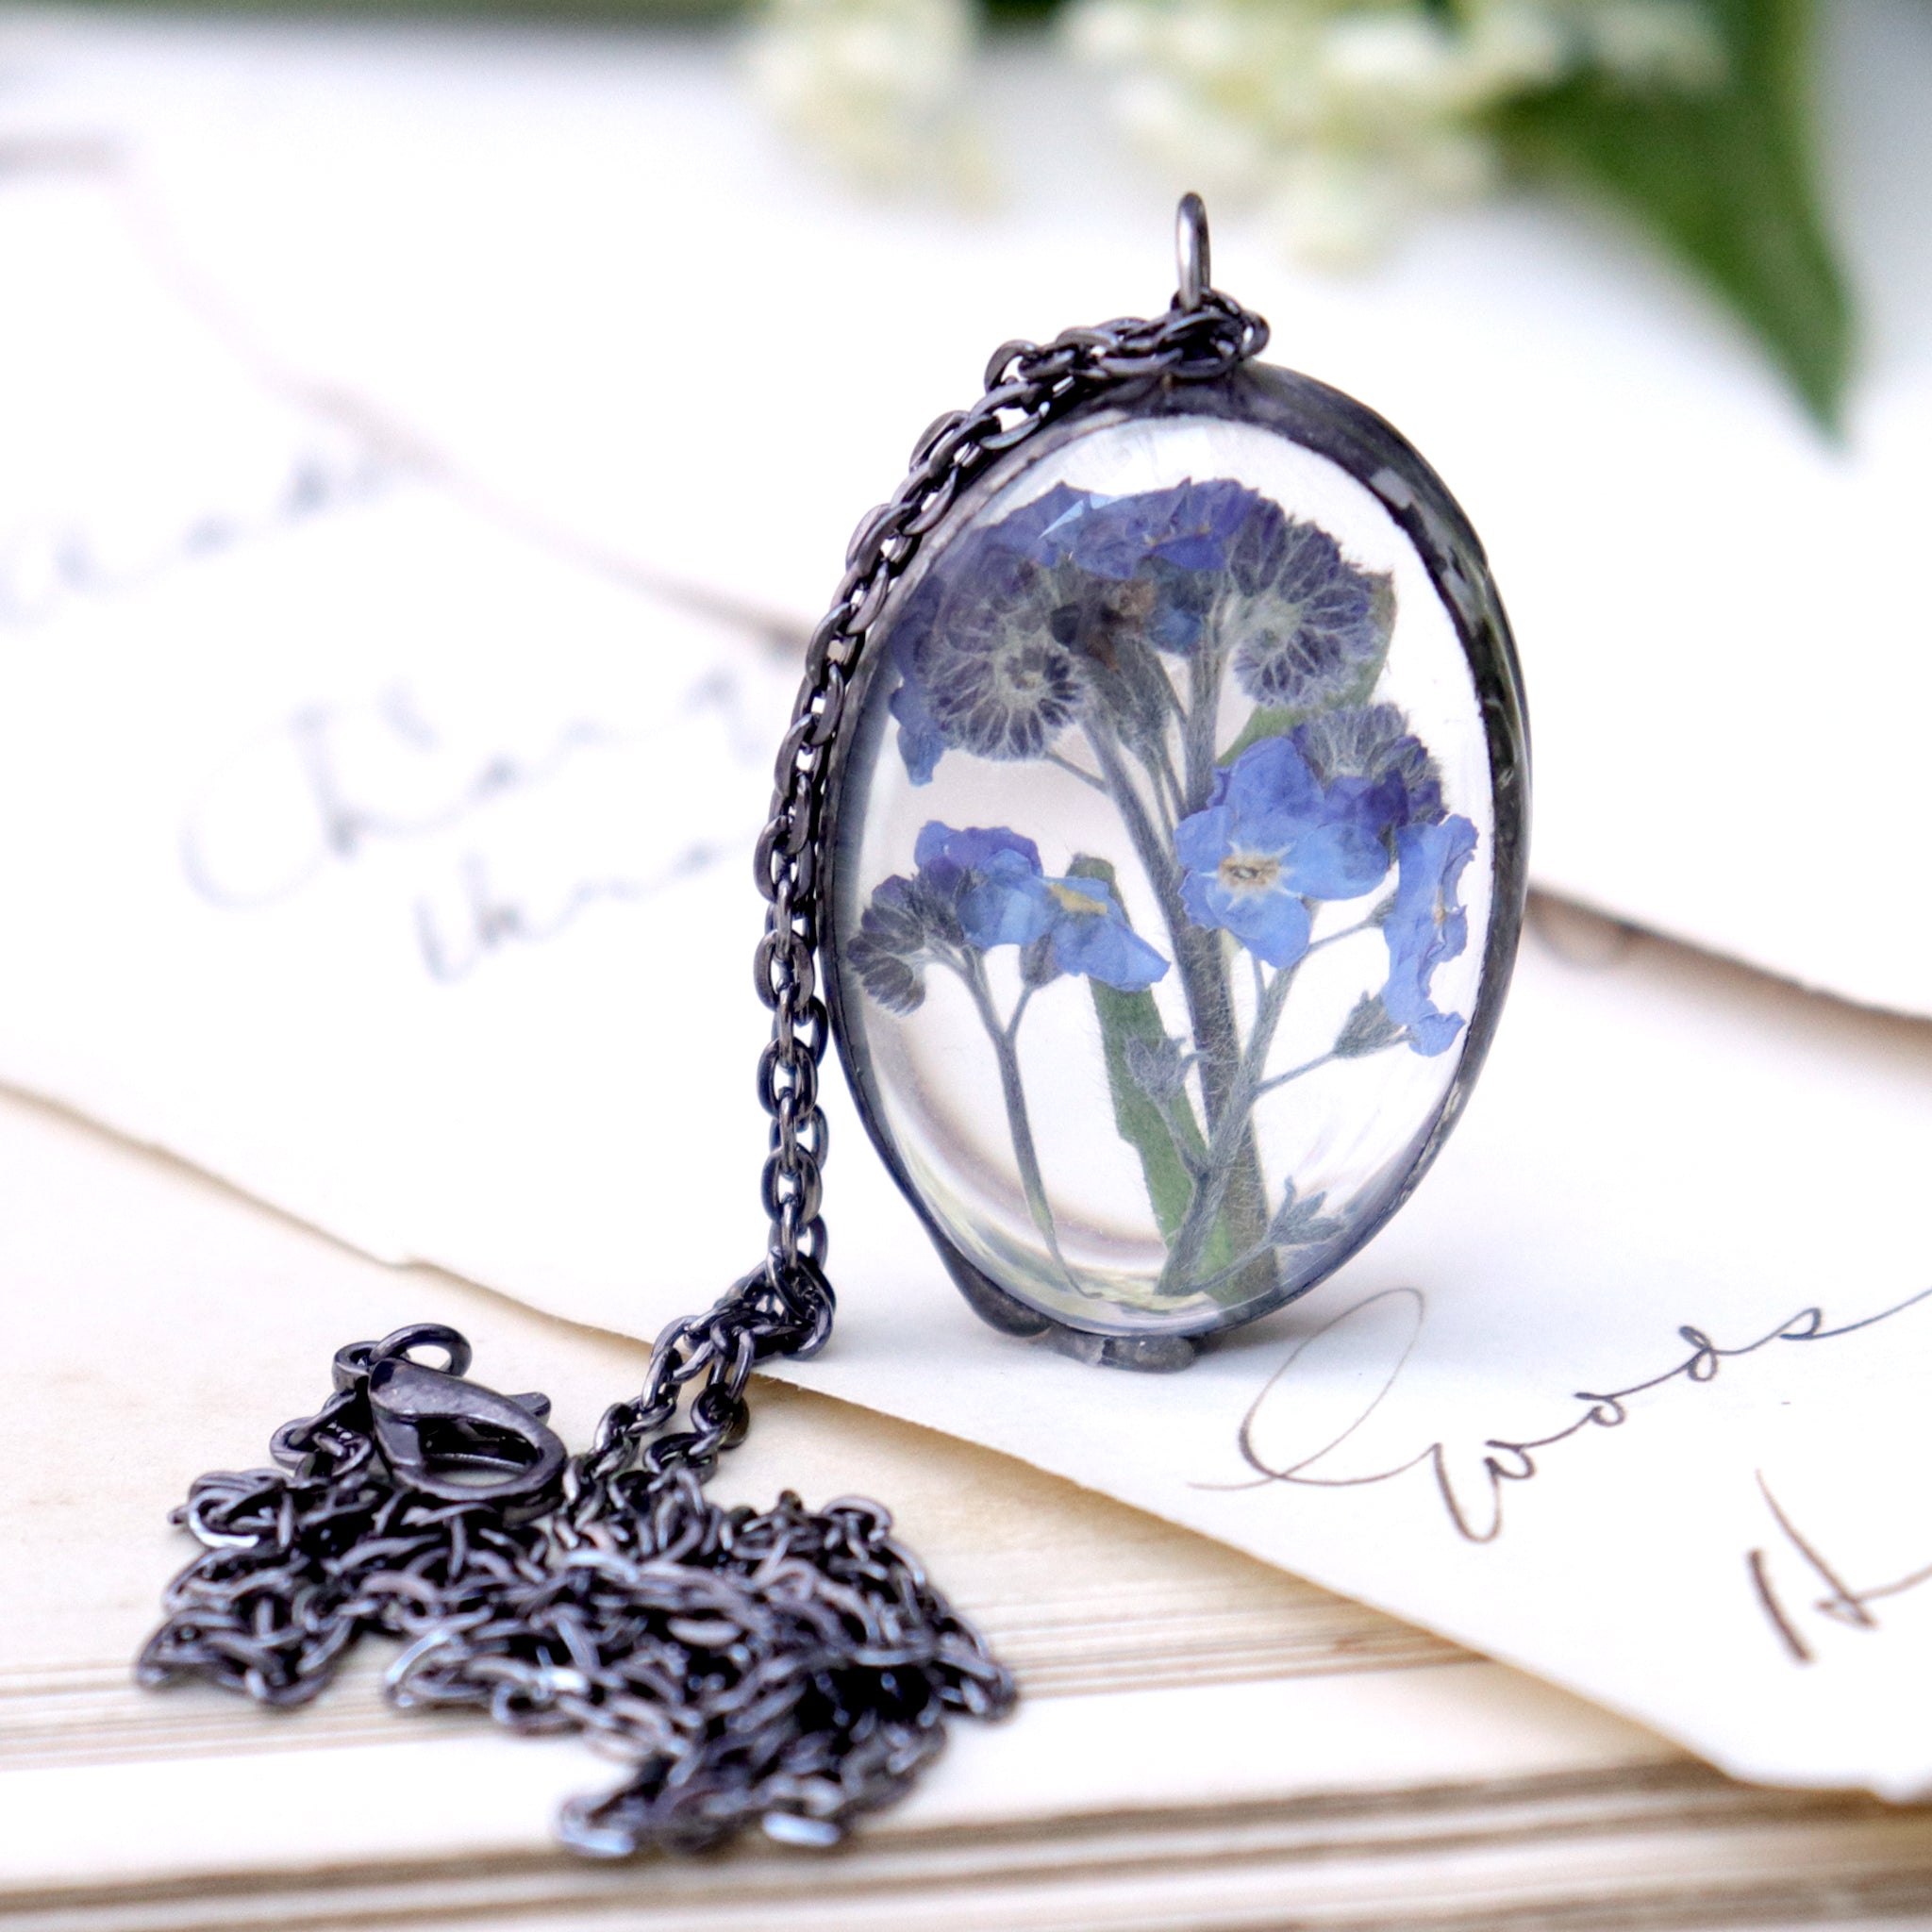 Forget-me-not oval necklace standing on the edge on an old book